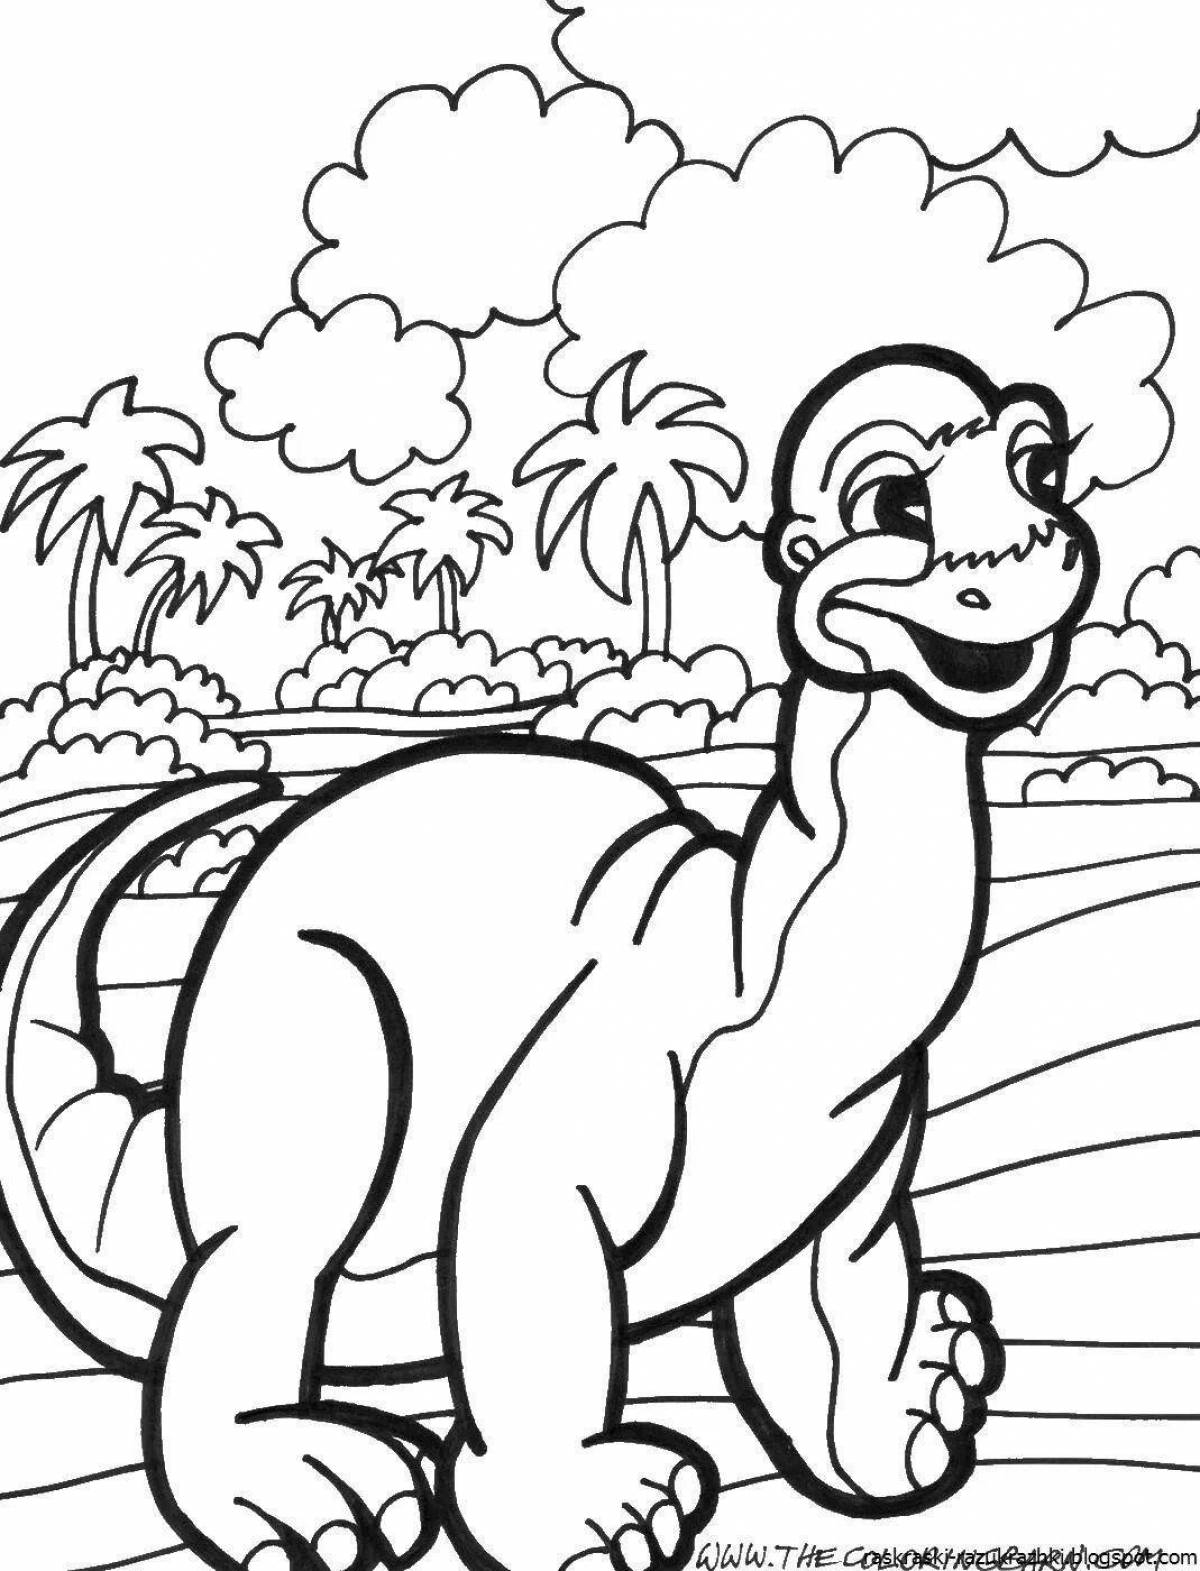 Creative dinosaur coloring book for 5-7 year old boys